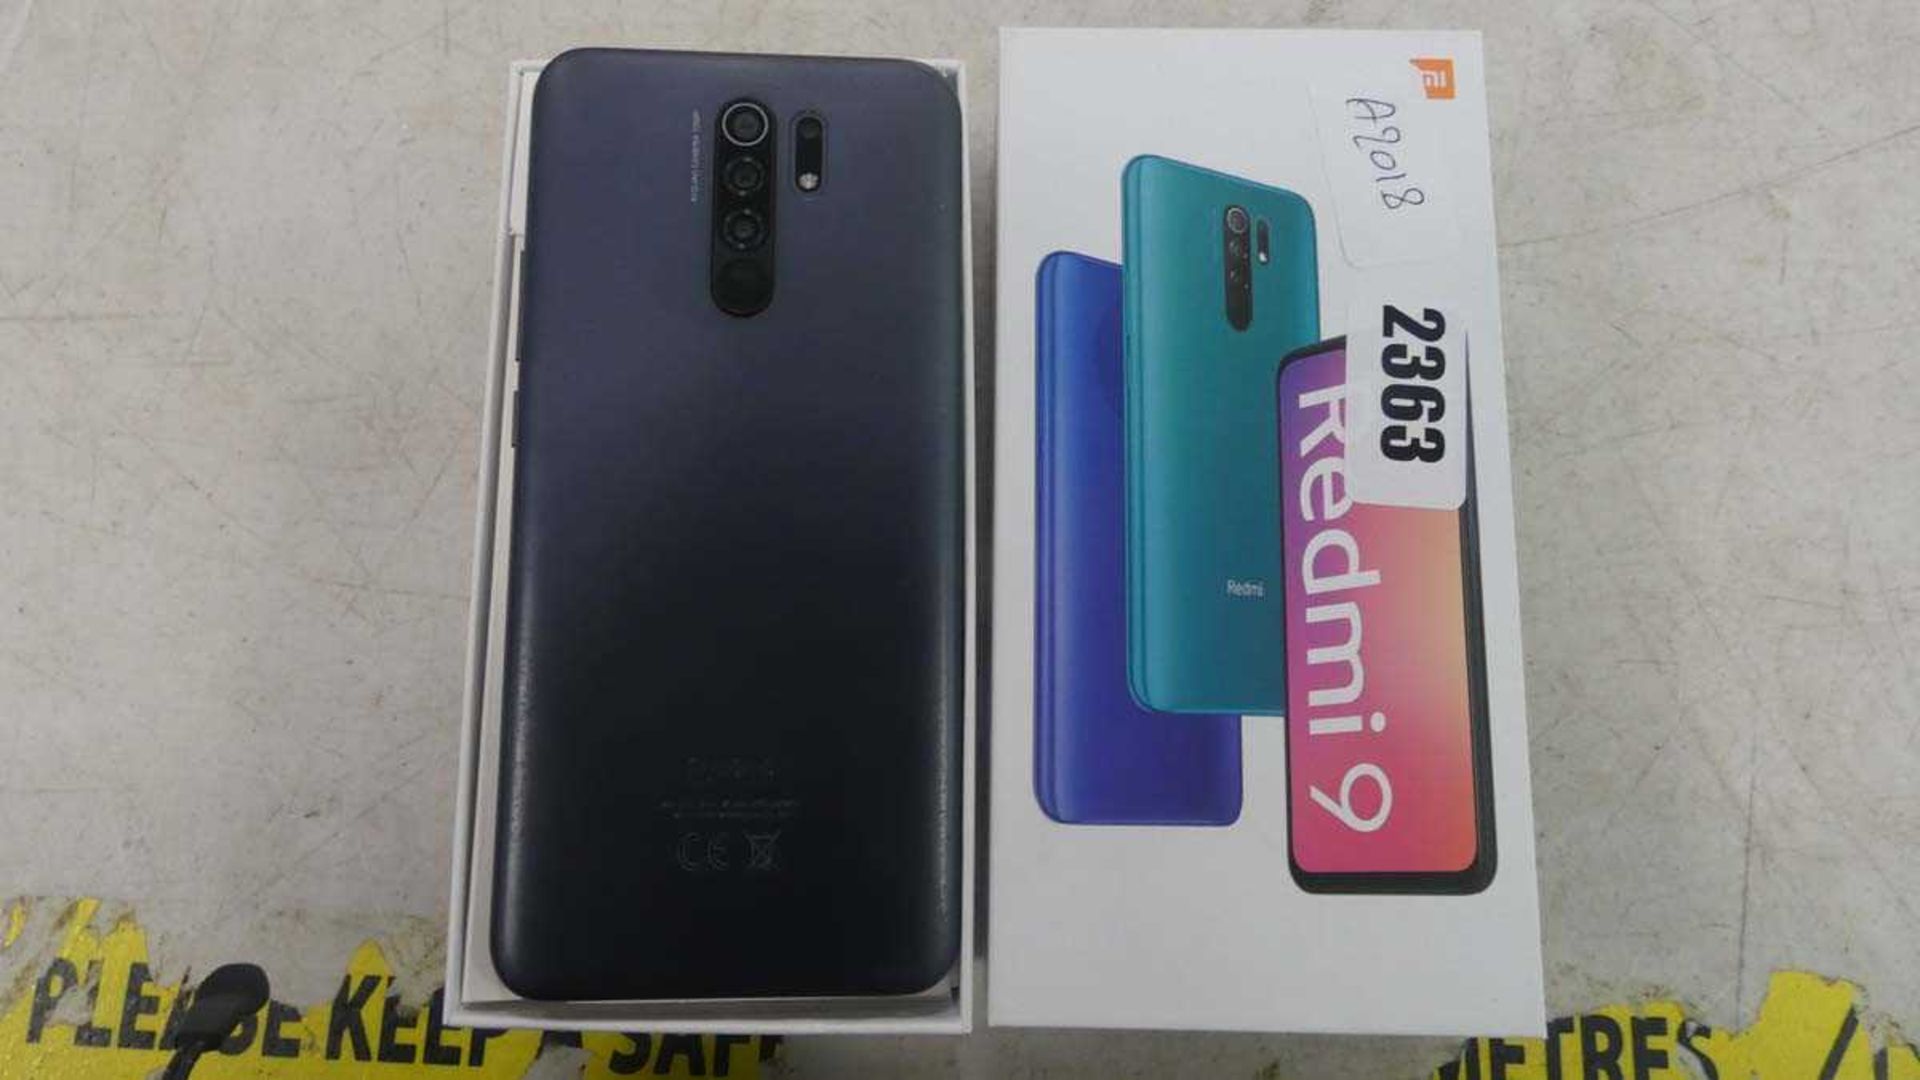 RedMi 9 Android mobile phone, boxed - Image 2 of 2